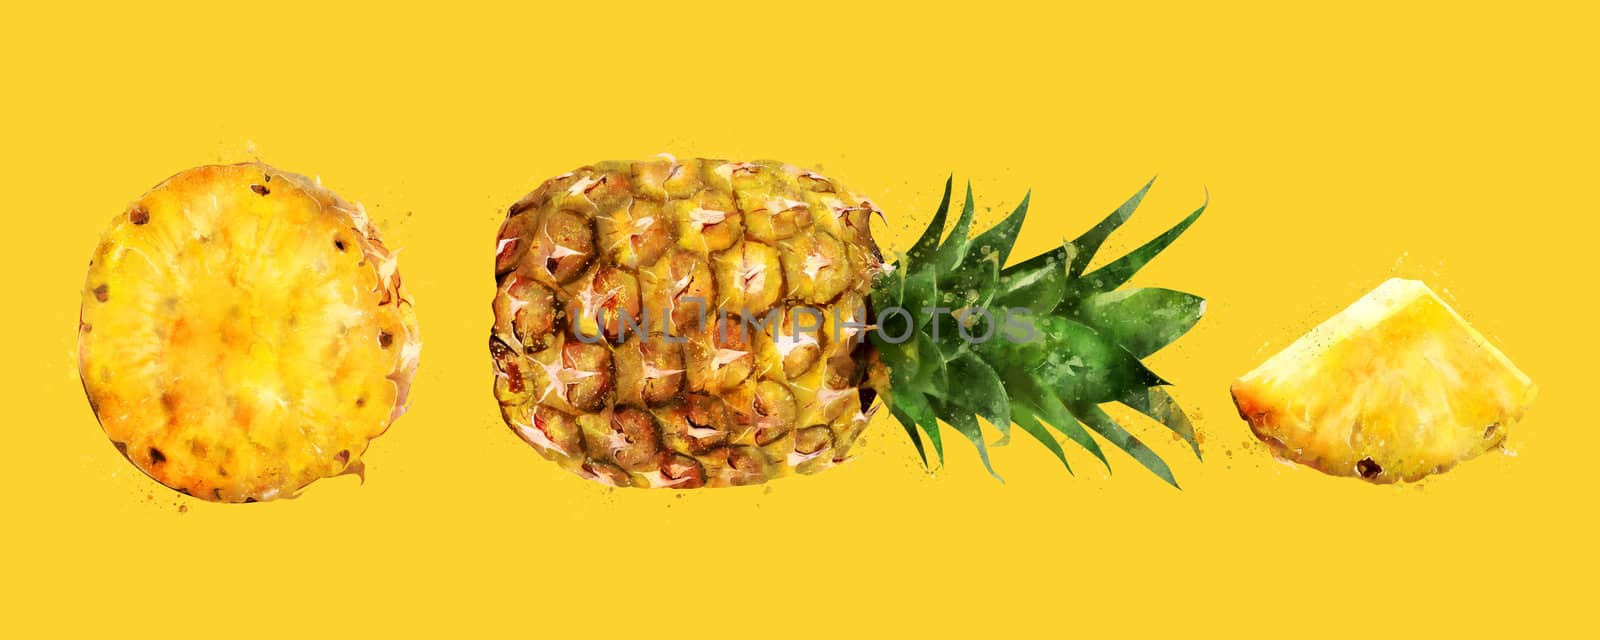 Pineapple, isolated hand-painted illustration on a yellow background